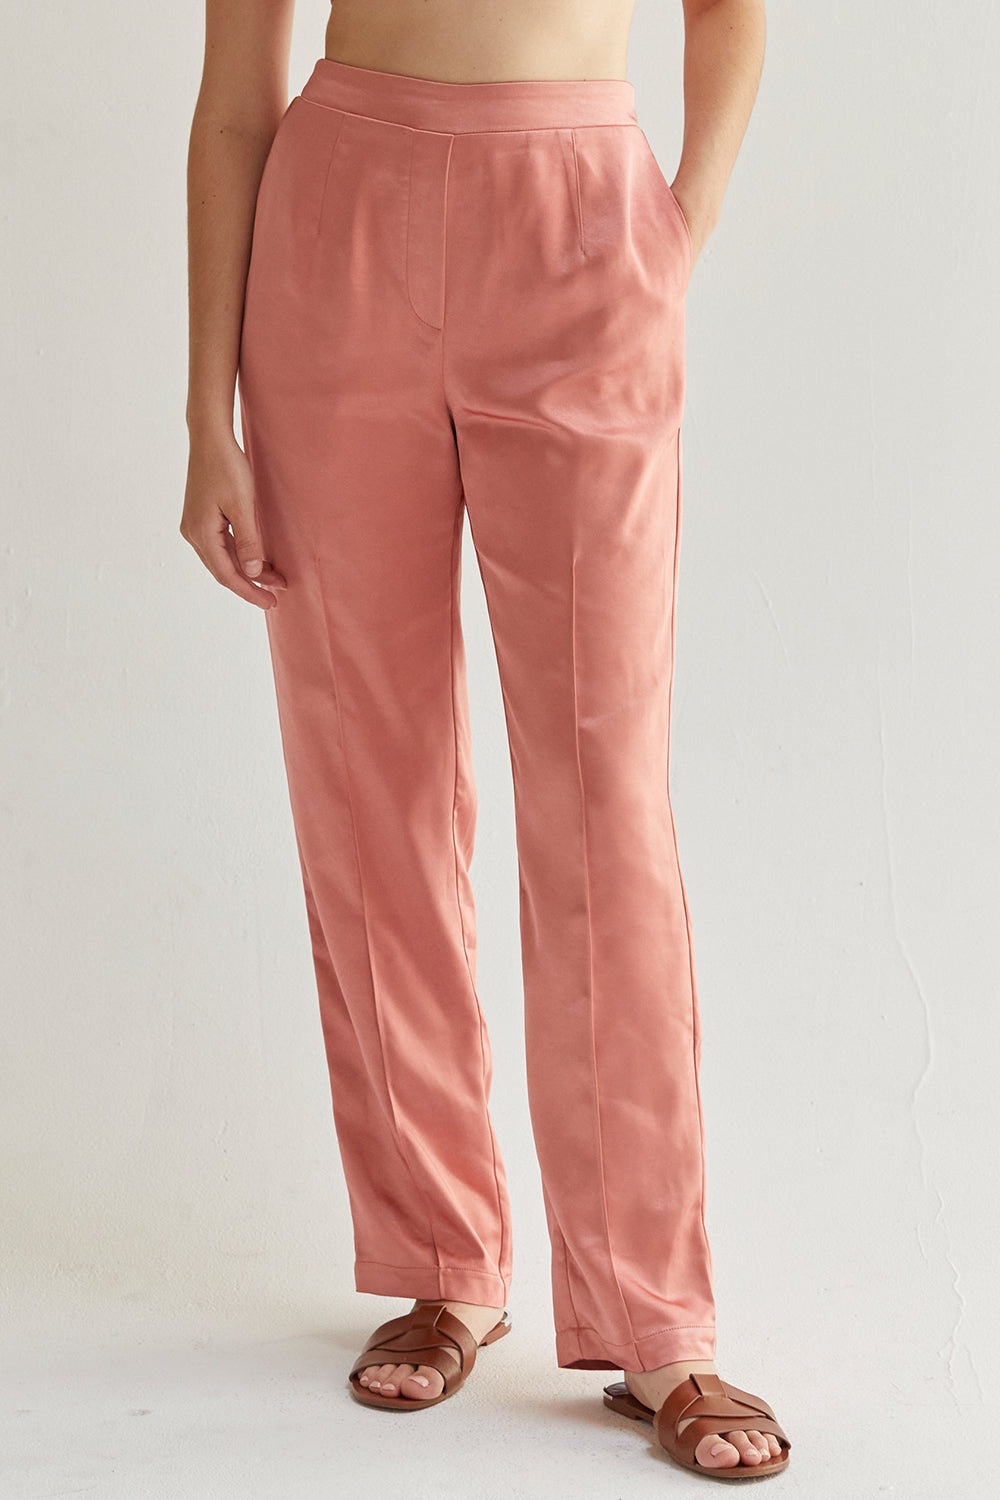 Chic Women's Pants | Free Shipping on $75+ | Crescent